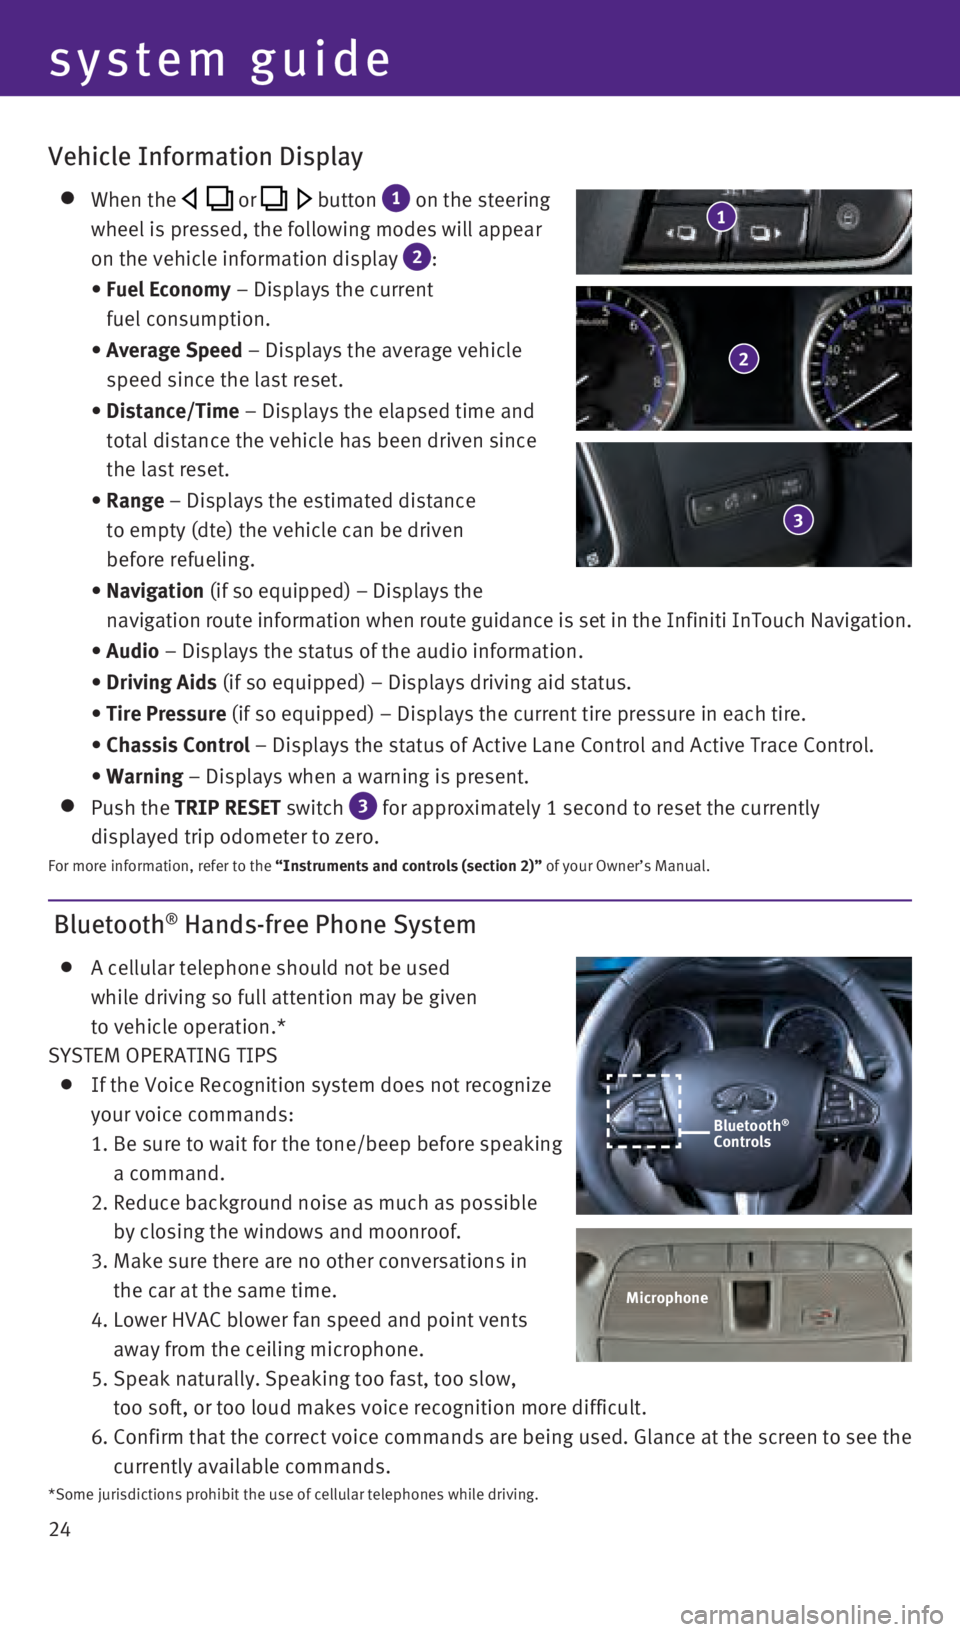 INFINITI Q50 2016  Quick Reference Guide 24
 Bluetooth® Hands-free Phone System
    A cellular telephone should not be used  
while driving so full attention may be given  
to vehicle operation.*
SYSTEM OPERATING TIPS
    If the Voice Recog